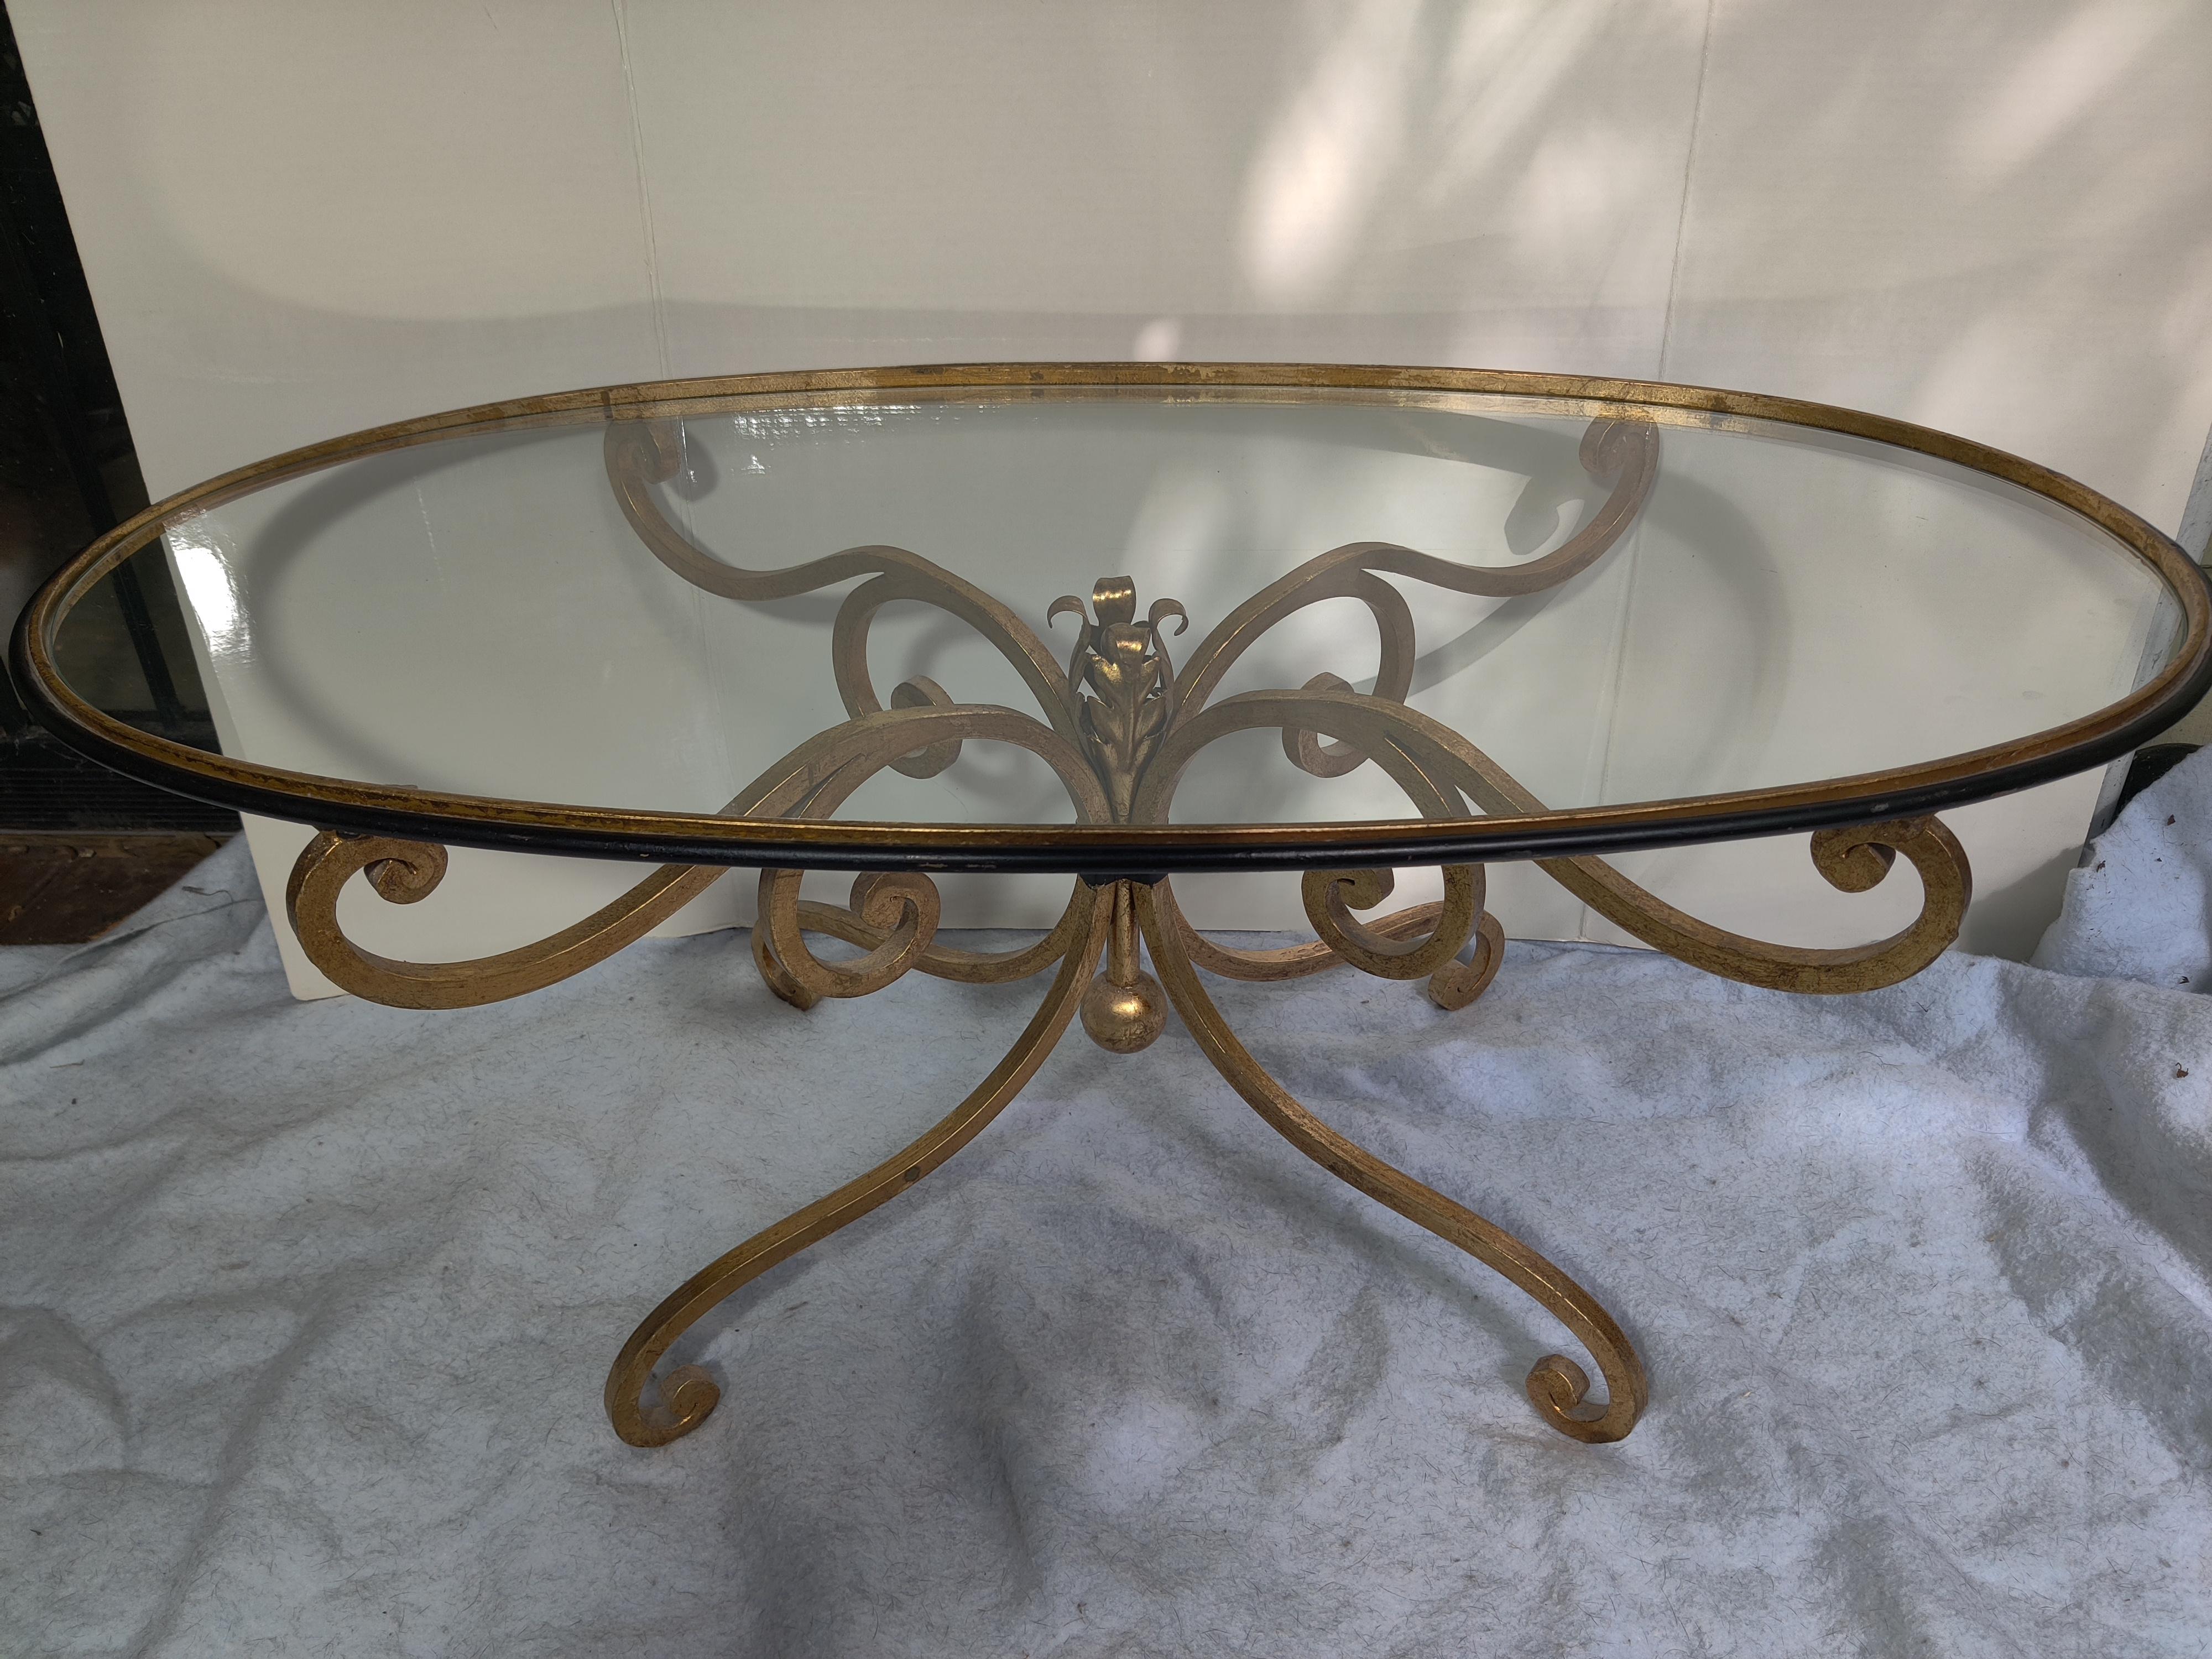 French Style Iron Gold Oval Coffee Table.  1960's - 1970's
Black and gold at side of table.   Small areas where black and gold paint are worn but in good condition. 
Glass has a few minor scratches, no chips.
Glass is inserted in a frame at top of